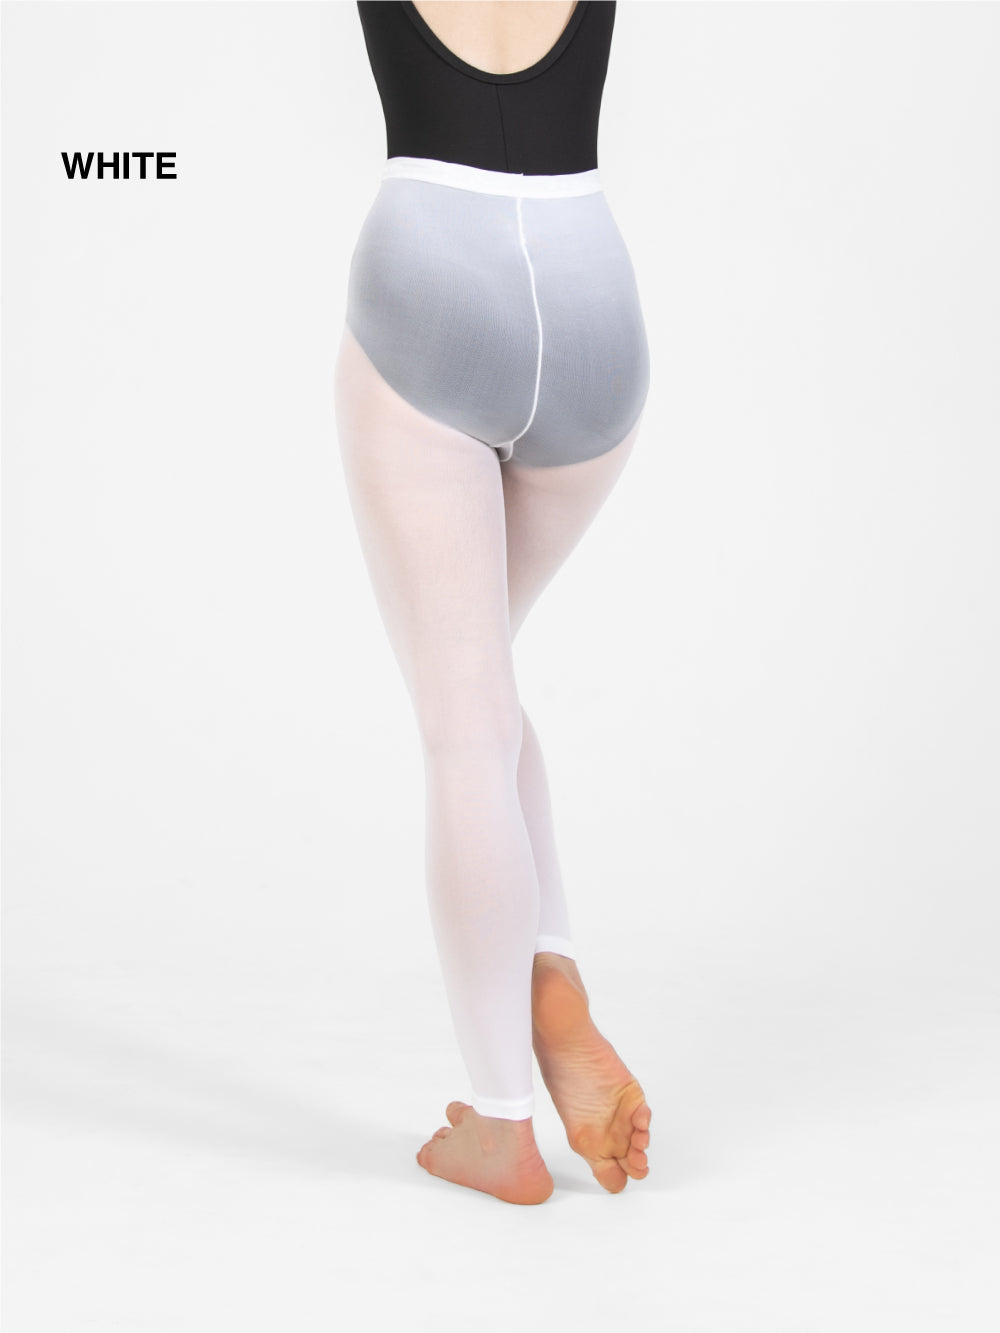 TotalSTRETCH® Adult Footless Tights